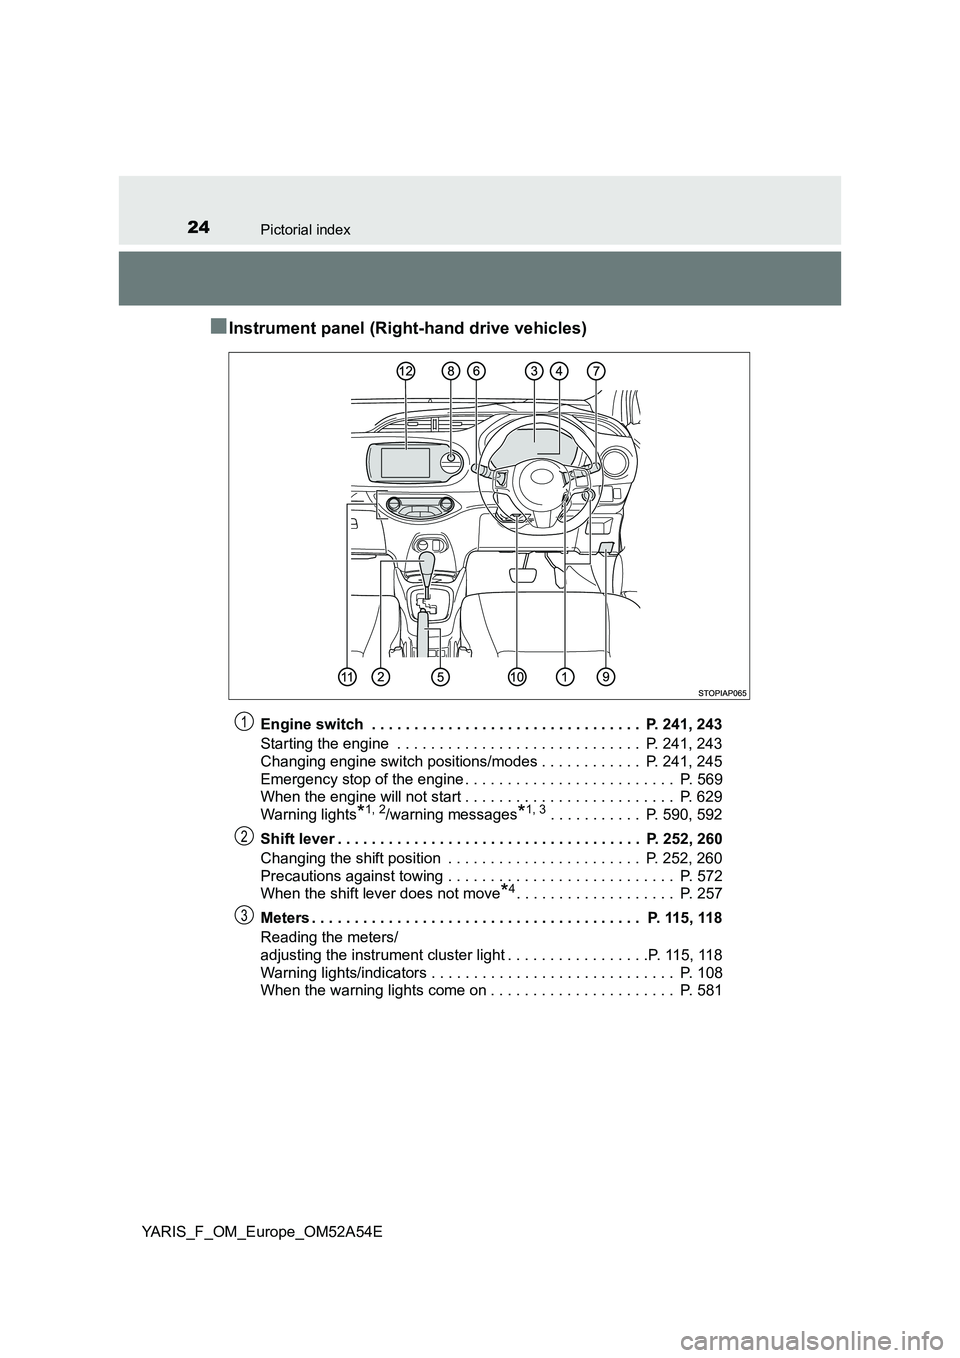 TOYOTA YARIS 2020  Owners Manual 24Pictorial index
YARIS_F_OM_Europe_OM52A54E
■Instrument panel (Right-hand drive vehicles)
Engine switch  . . . . . . . . . . . . . . . . . . . . . . . . . . . . . . . .  P. 241, 243 
Starting the e